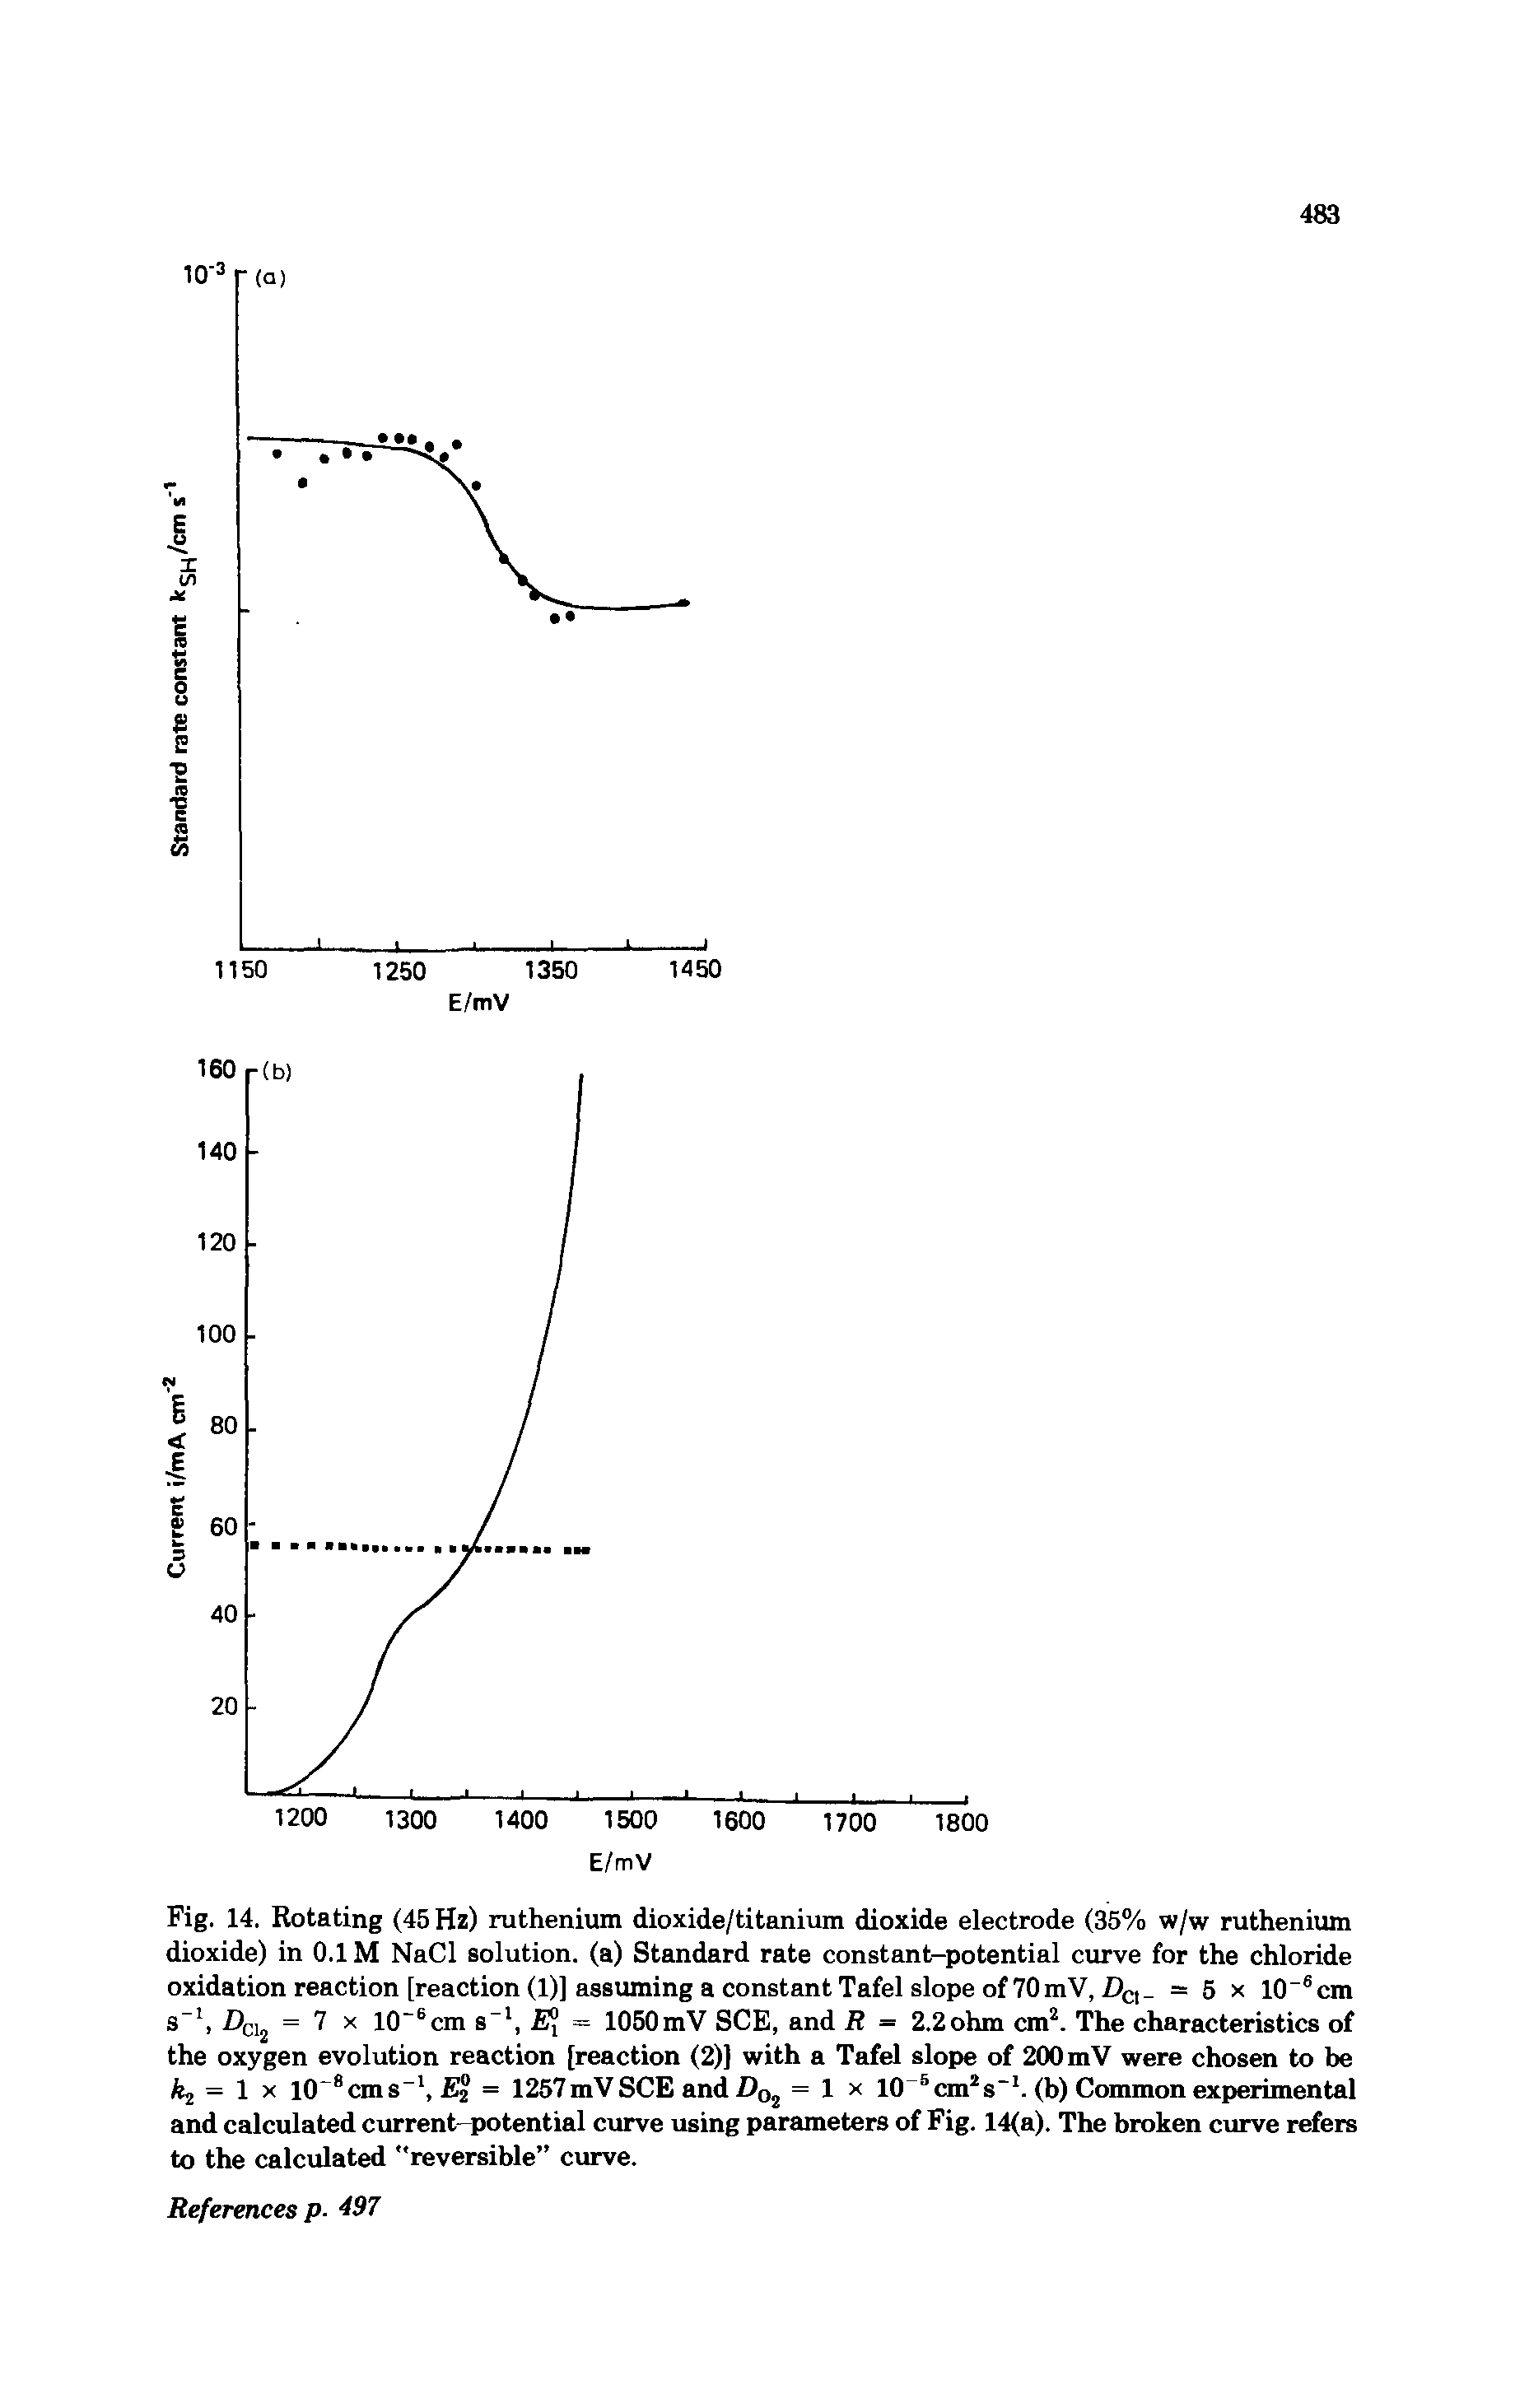 Fig. 14. Rotating (45 Hz) ruthenium dioxide/titanium dioxide electrode (35% w/w ruthenium dioxide) in 0.1 M NaCl solution, (a) Standard rate constant-potential curve for the chloride oxidation reaction [reaction (1)] assuming a constant Tafel slope of 70mV, Da — 5 x 10 6cm s 1, Z)cl2 = 7 x 10 6cm s 1, E[ = 1050mV SCE, and R = 2.2ohm cm2. The characteristics of the oxygen evolution reaction [reaction (2)] with a Tafel slope of 200 mV were chosen to be fej, = 1 x 10 8 cm s, EH = 1257 mV SCE and Dq2 = 1 x 10 5 cm2 s 1, (b) Common experimental and calculated current-potential curve using parameters of Fig. 14(a). The broken curve refers to the calculated "reversible curve.